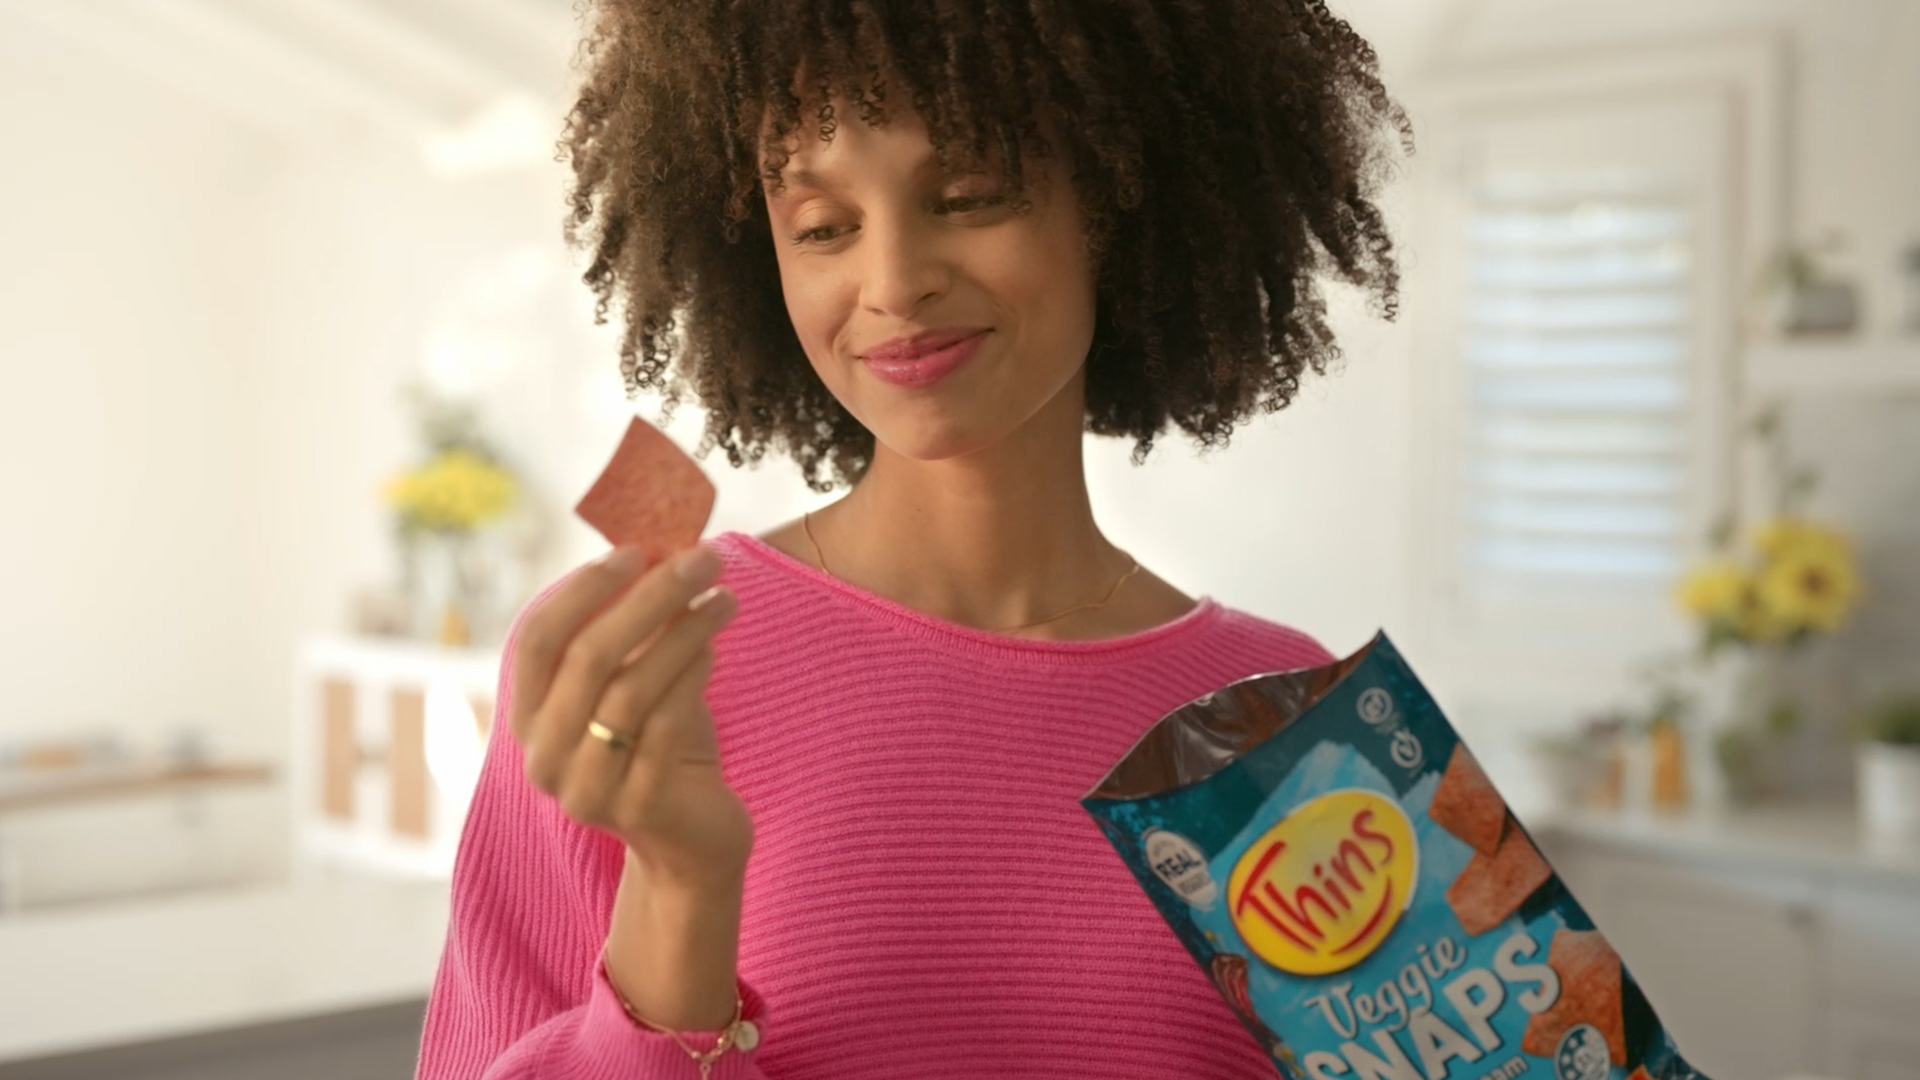 Still from the VANDAL produced Thins Veggie Snaps TVC featuring a woman staring at a chip while holding the product bag